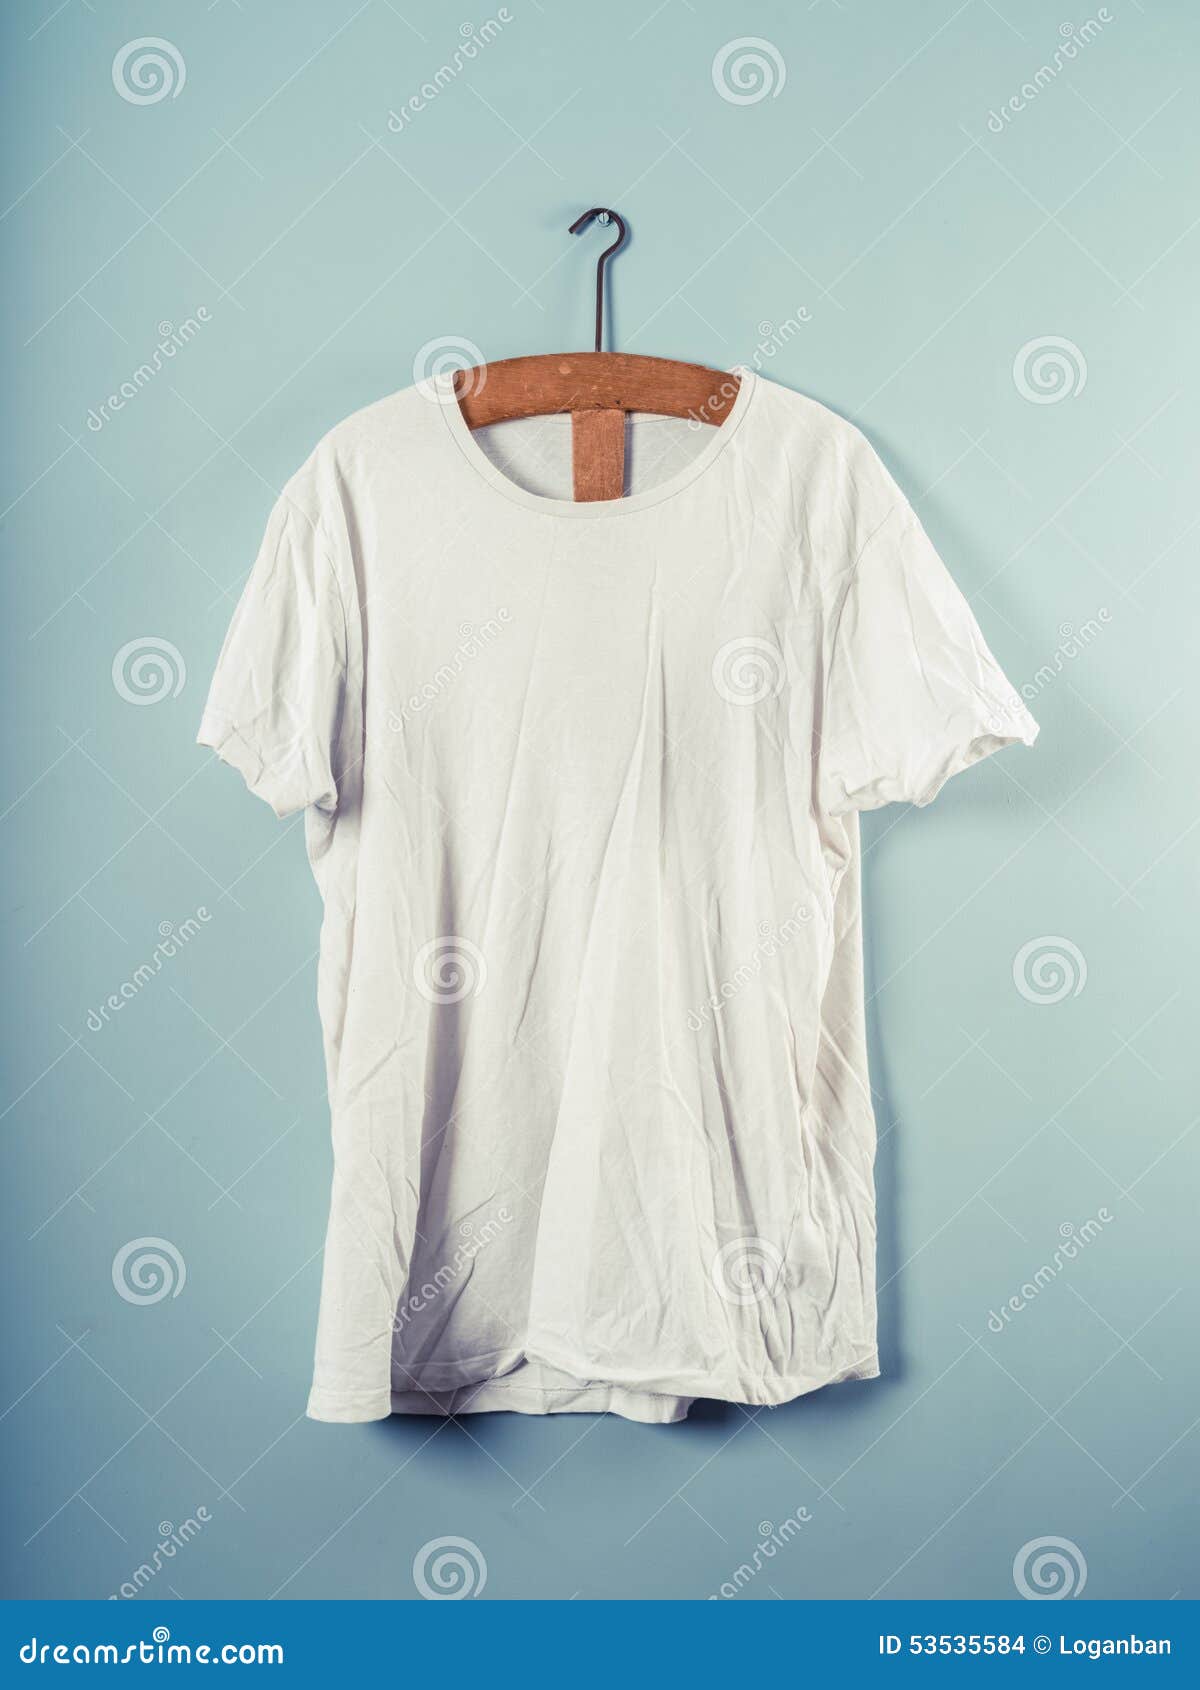 White T-shirt and Wooden Hanger Stock Photo - Image of background ...